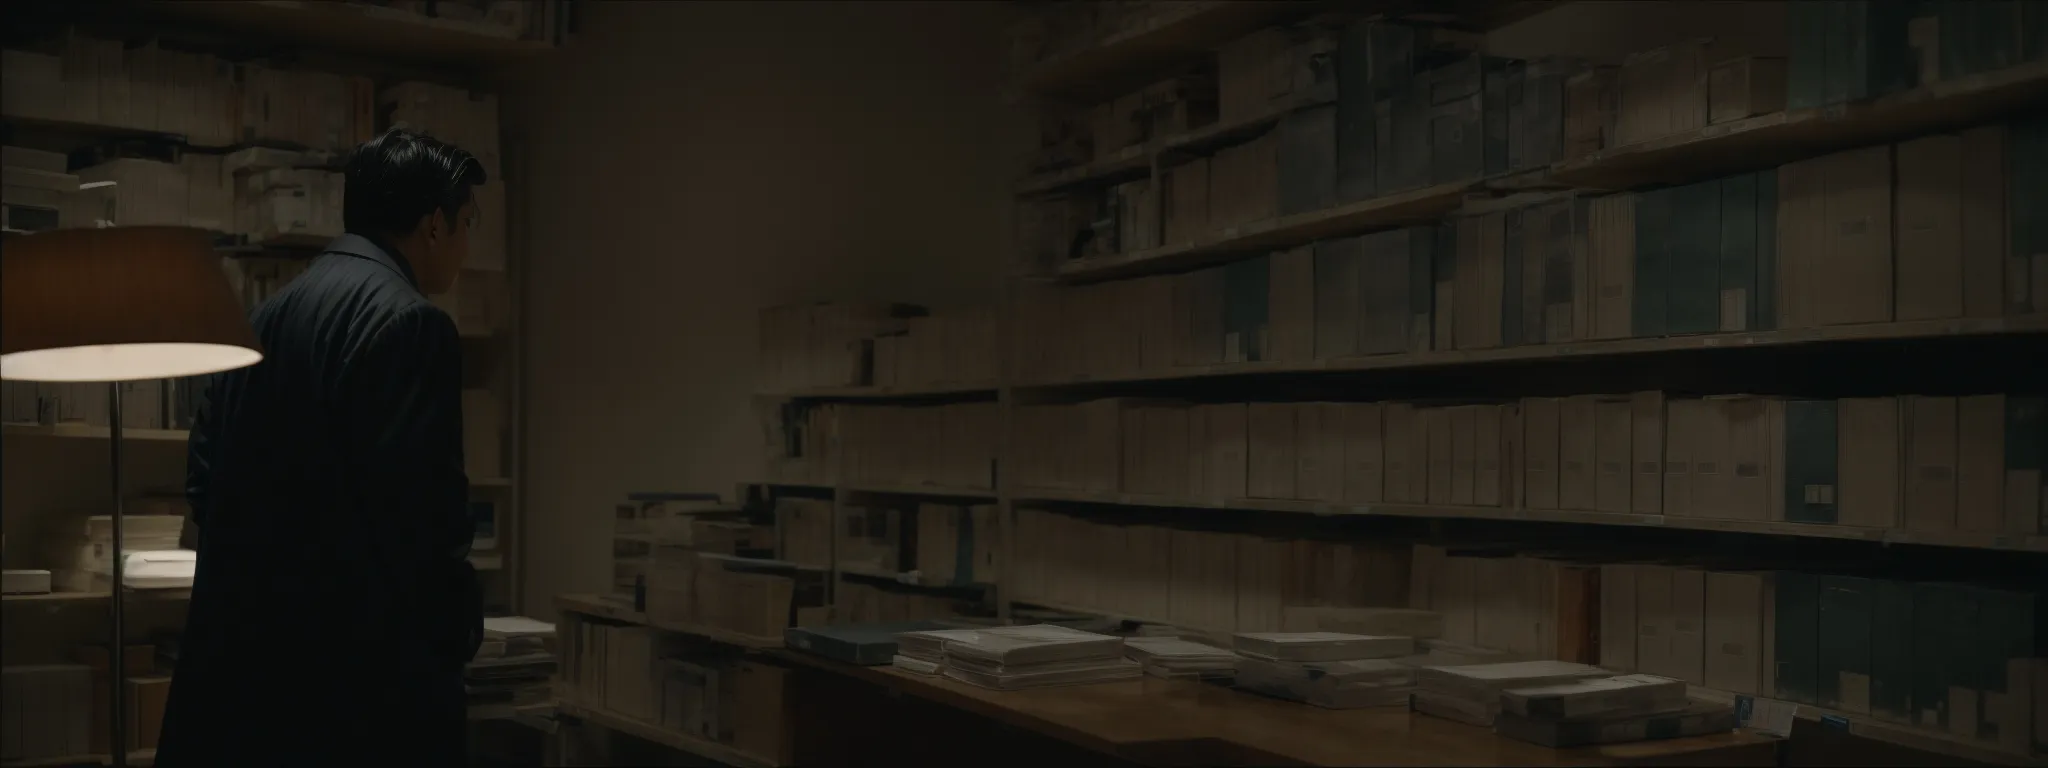 a detective stands in a dimly lit archive room, surrounded by shelves filled with old files and a large monitor displaying a website's historic snapshot.